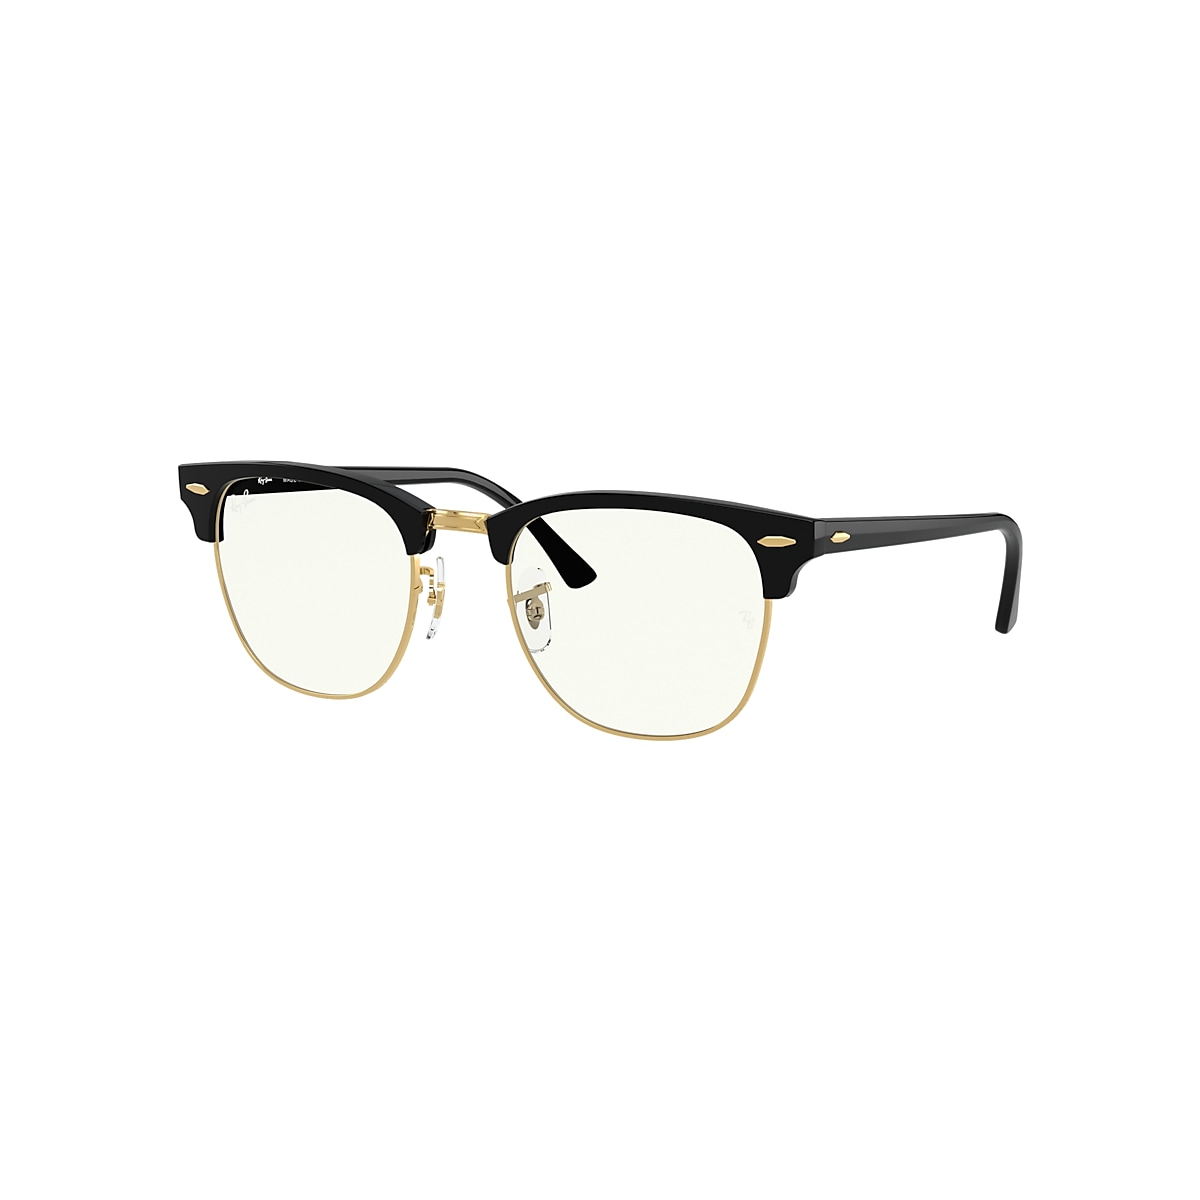 Australian person Canberra Stem Clubmaster Blue-light Clear - Everglasses | Ray-Ban®